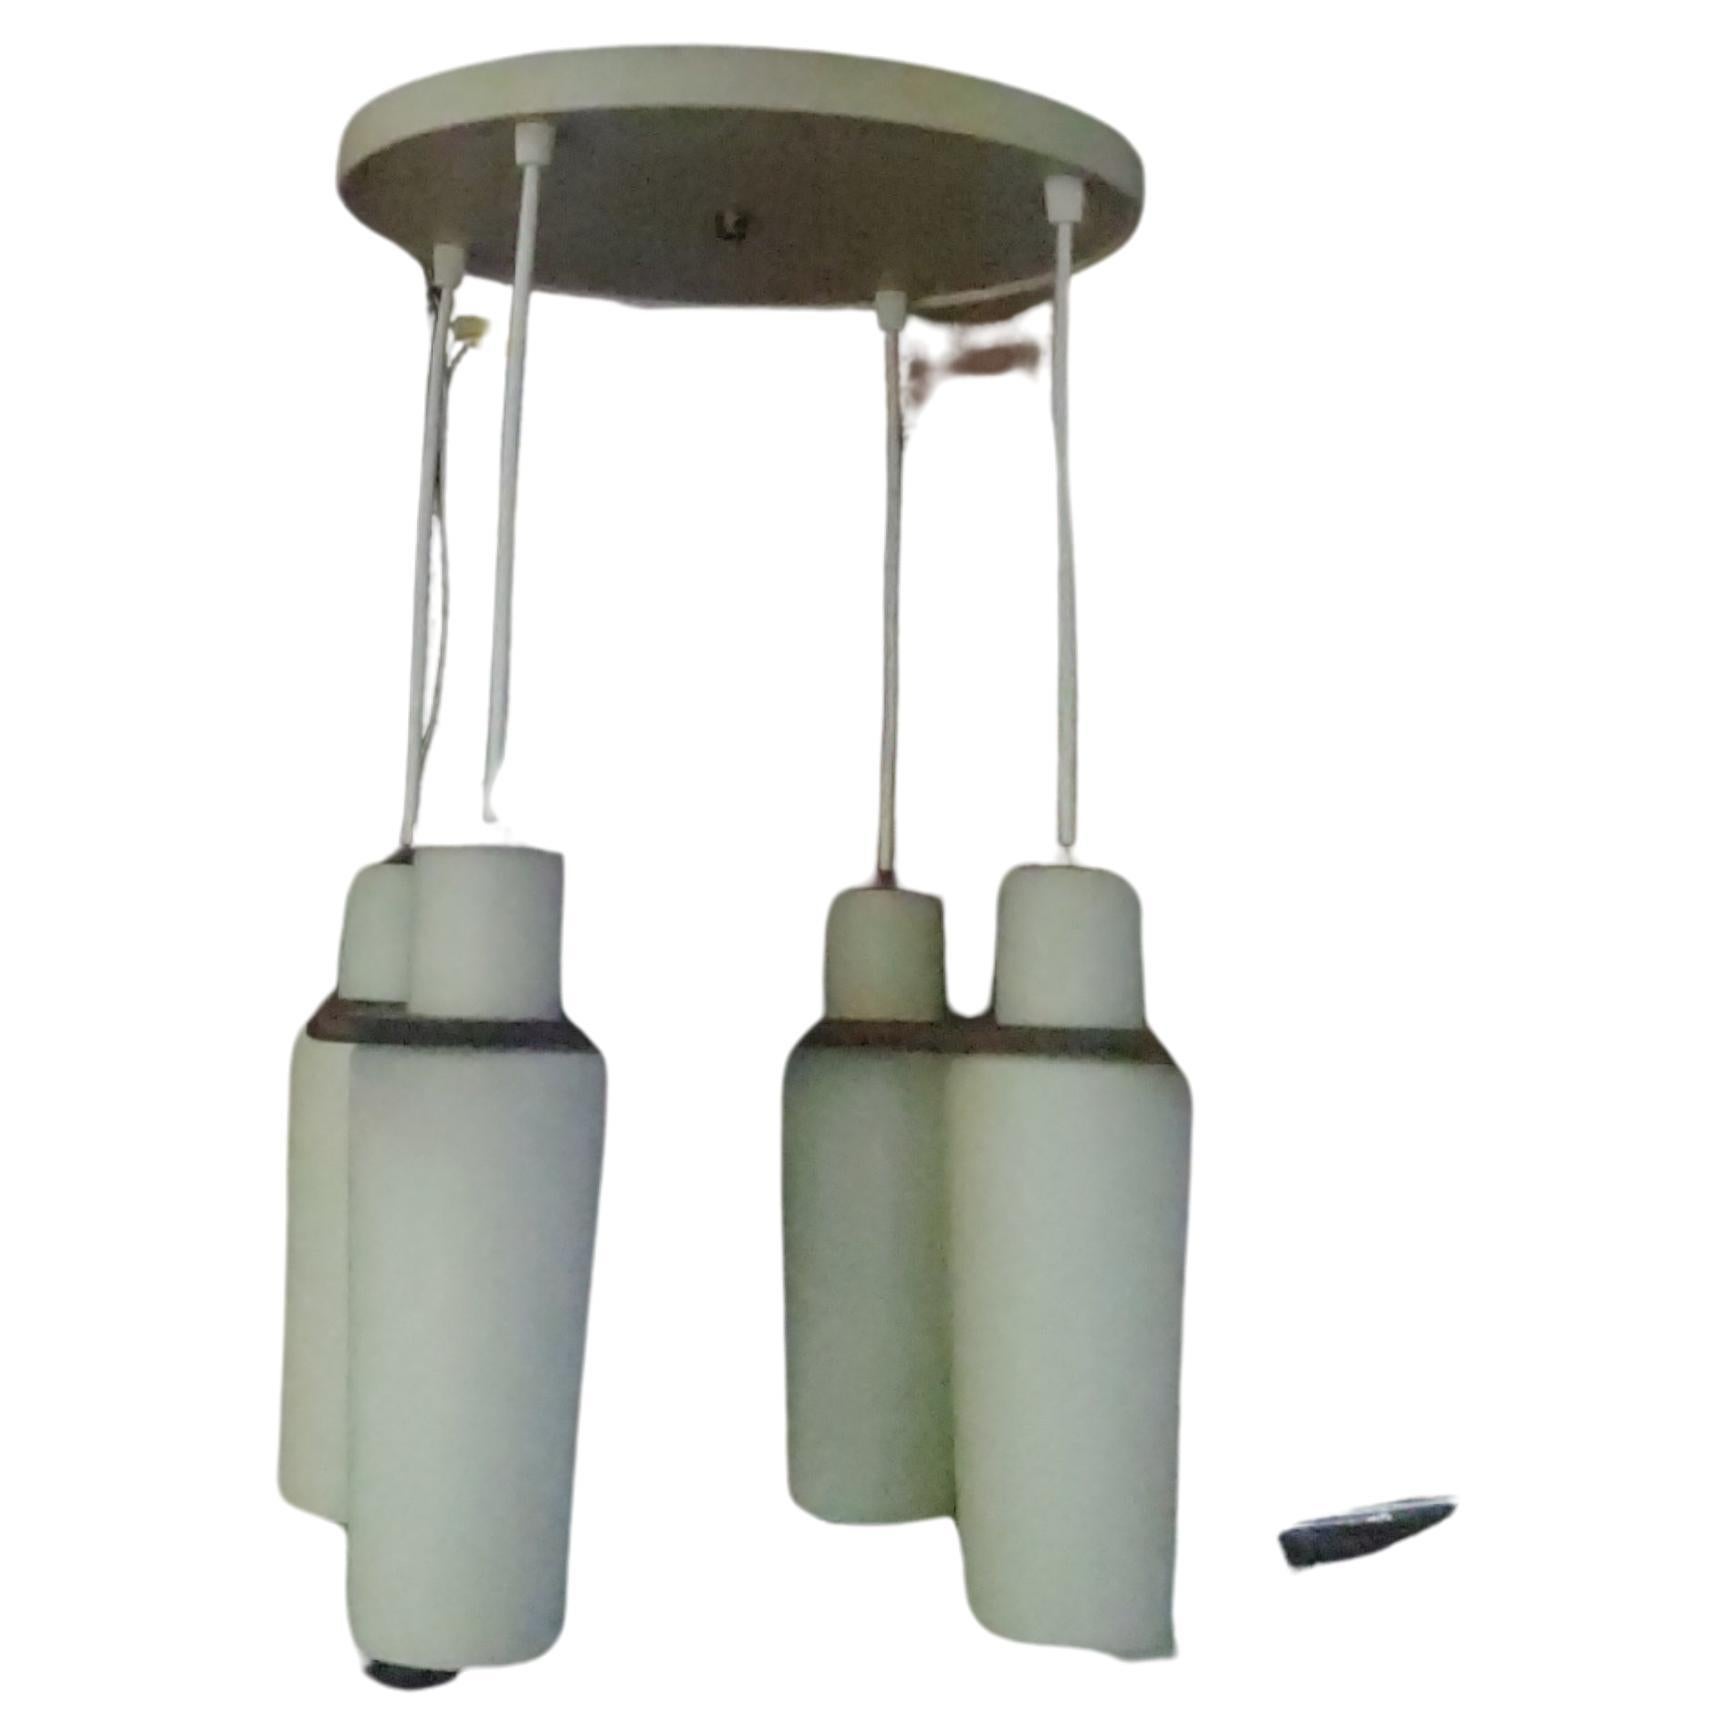 Simple and elegant 4 light pendant chandelier from Denmark. Blown in a mold milk Glass shades with walnut caps & hanger. All the wood is stamped Denmark. Totally rewired. In excellent vintage condition with minimal wear. Original metal canopy,